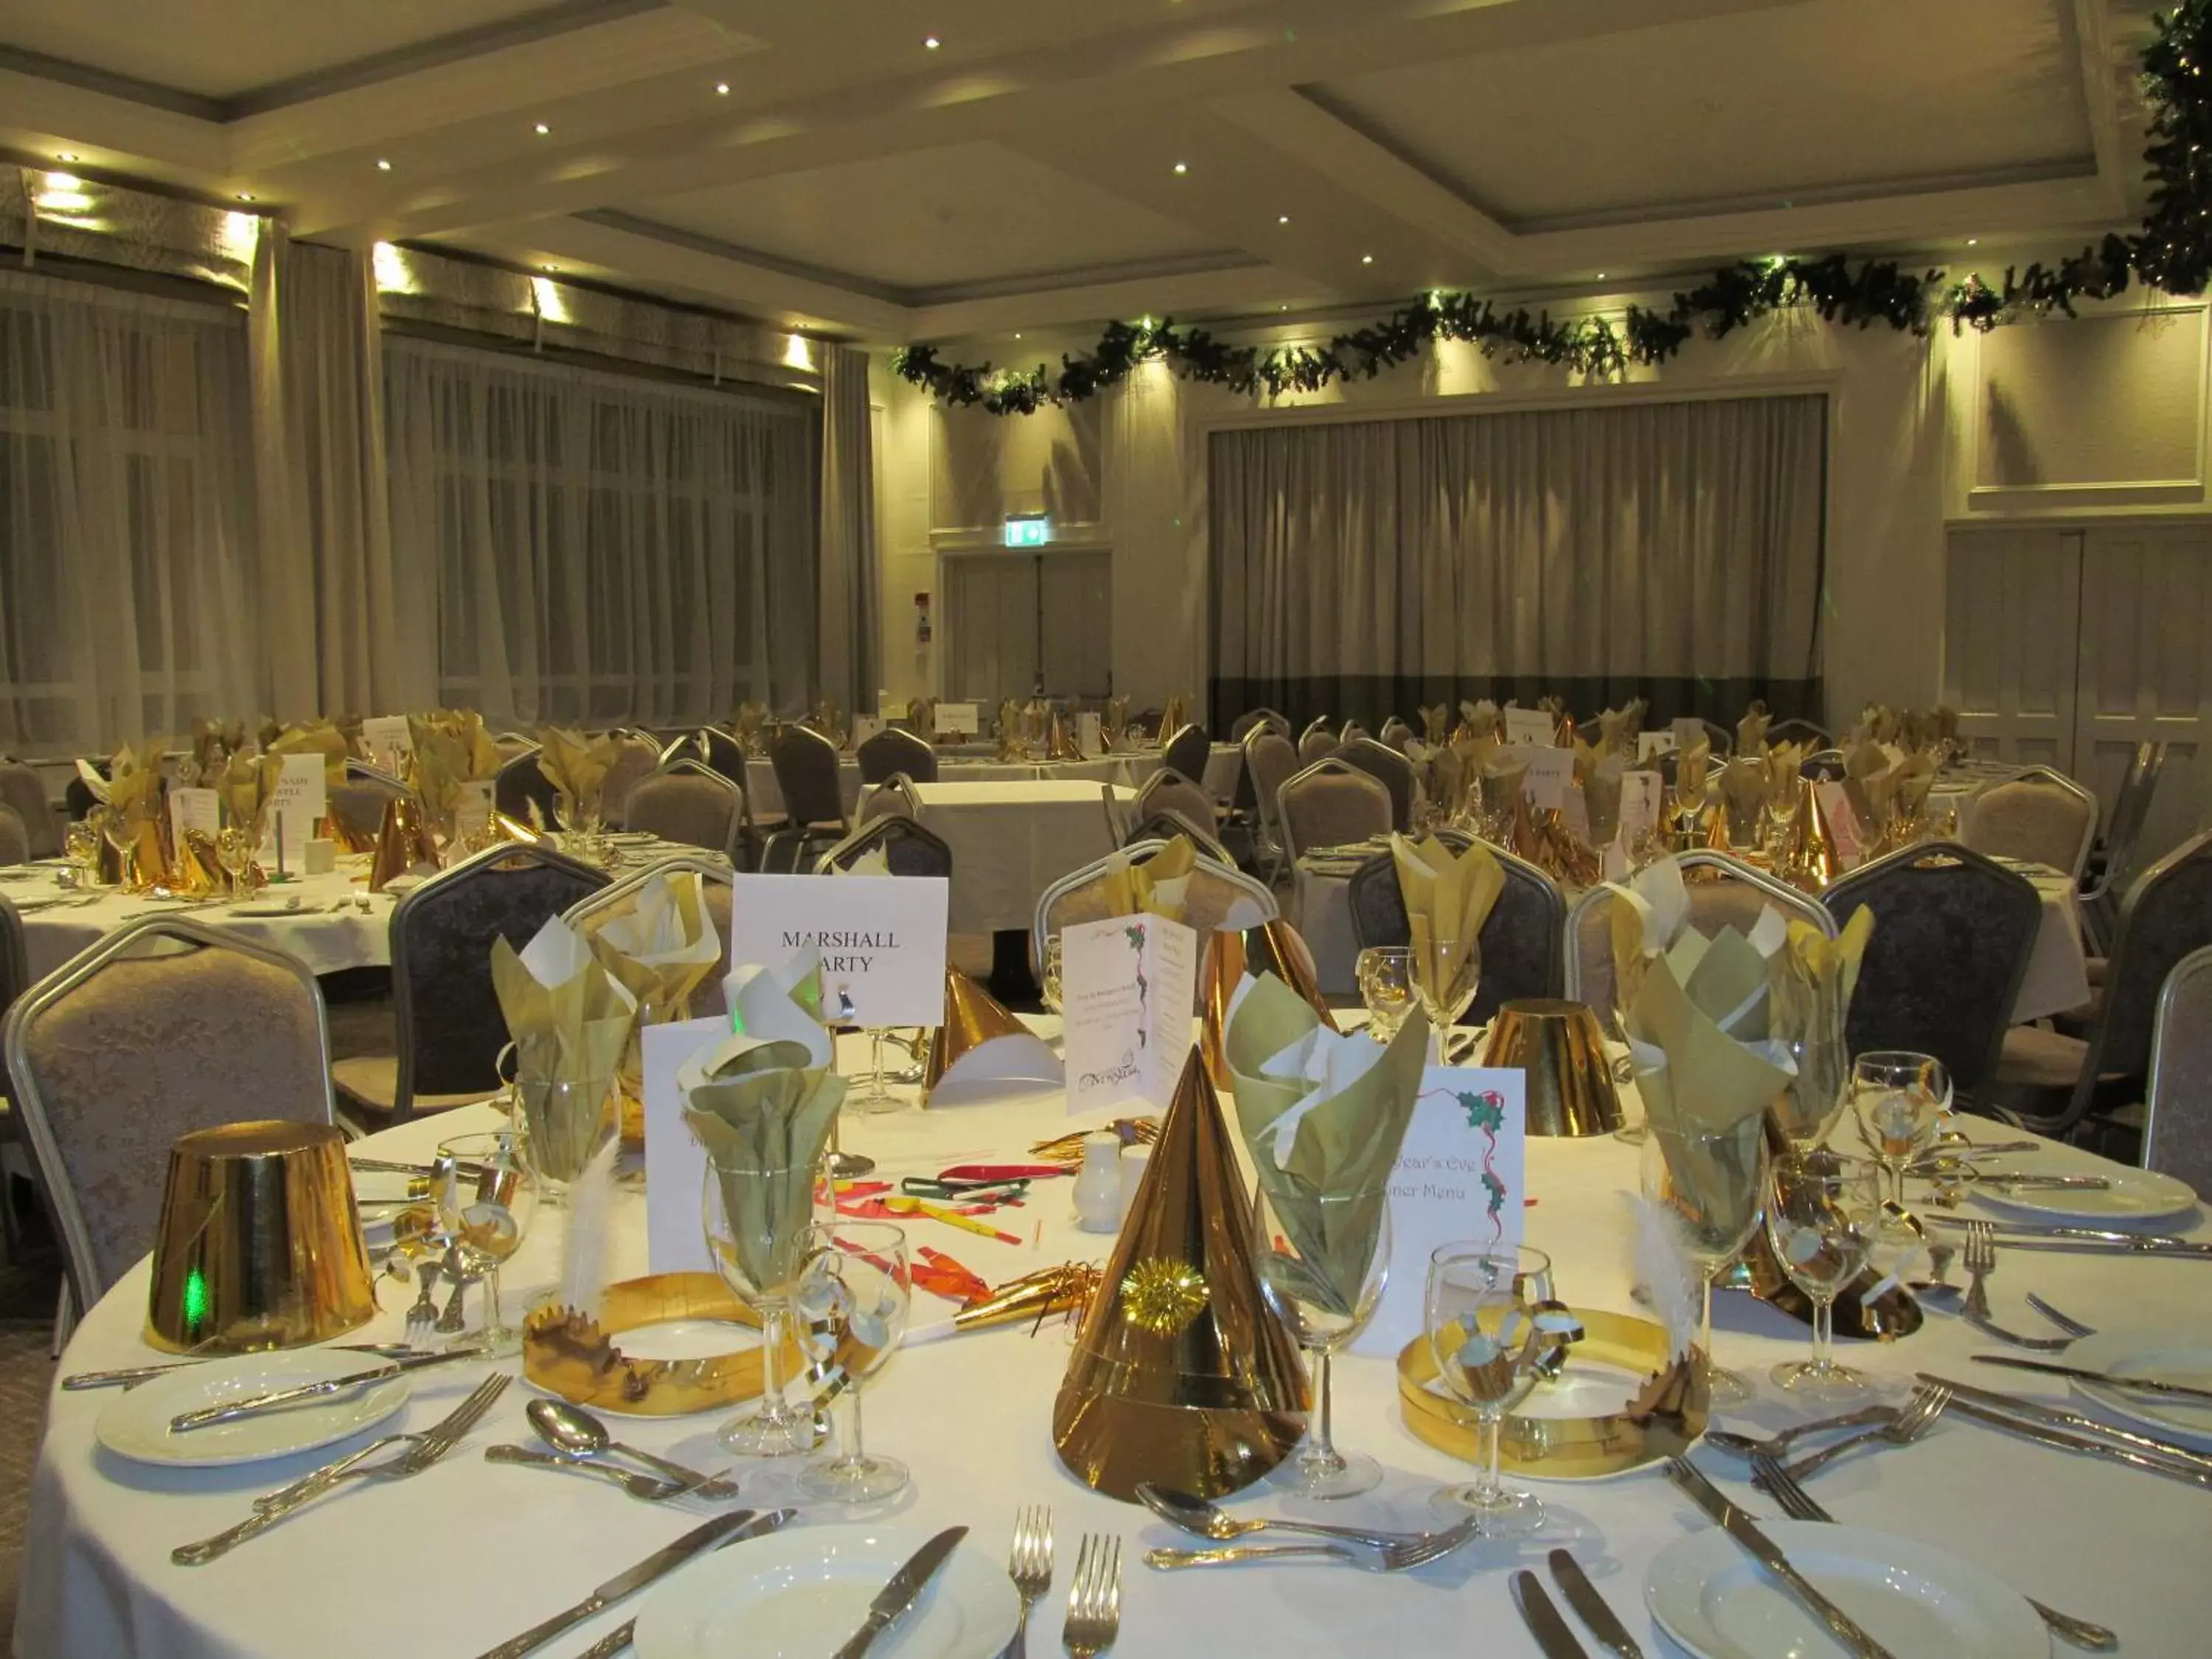 Banquet/Function facilities, Banquet Facilities in Best Western The Shrubbery